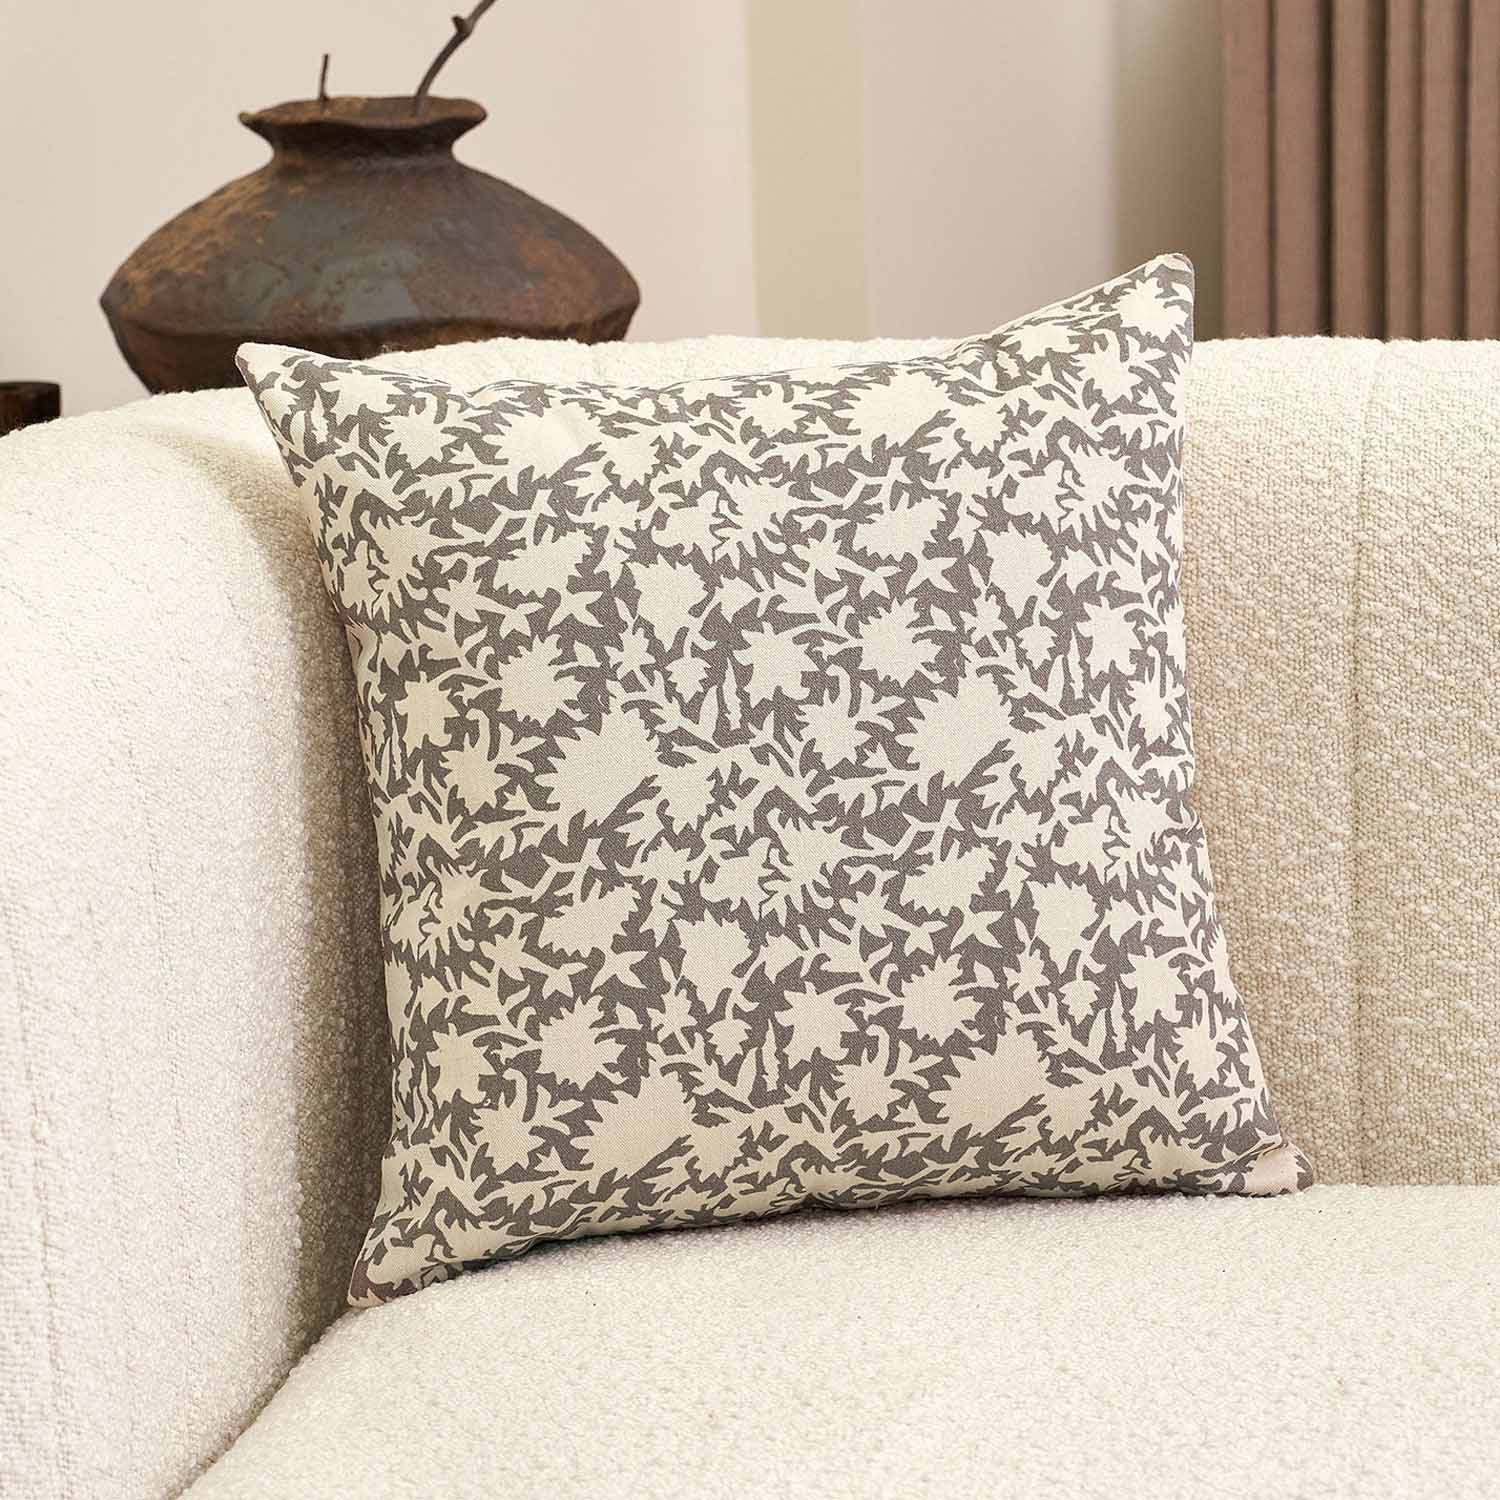 Modena Delicate Floral Print Pillow Cover-